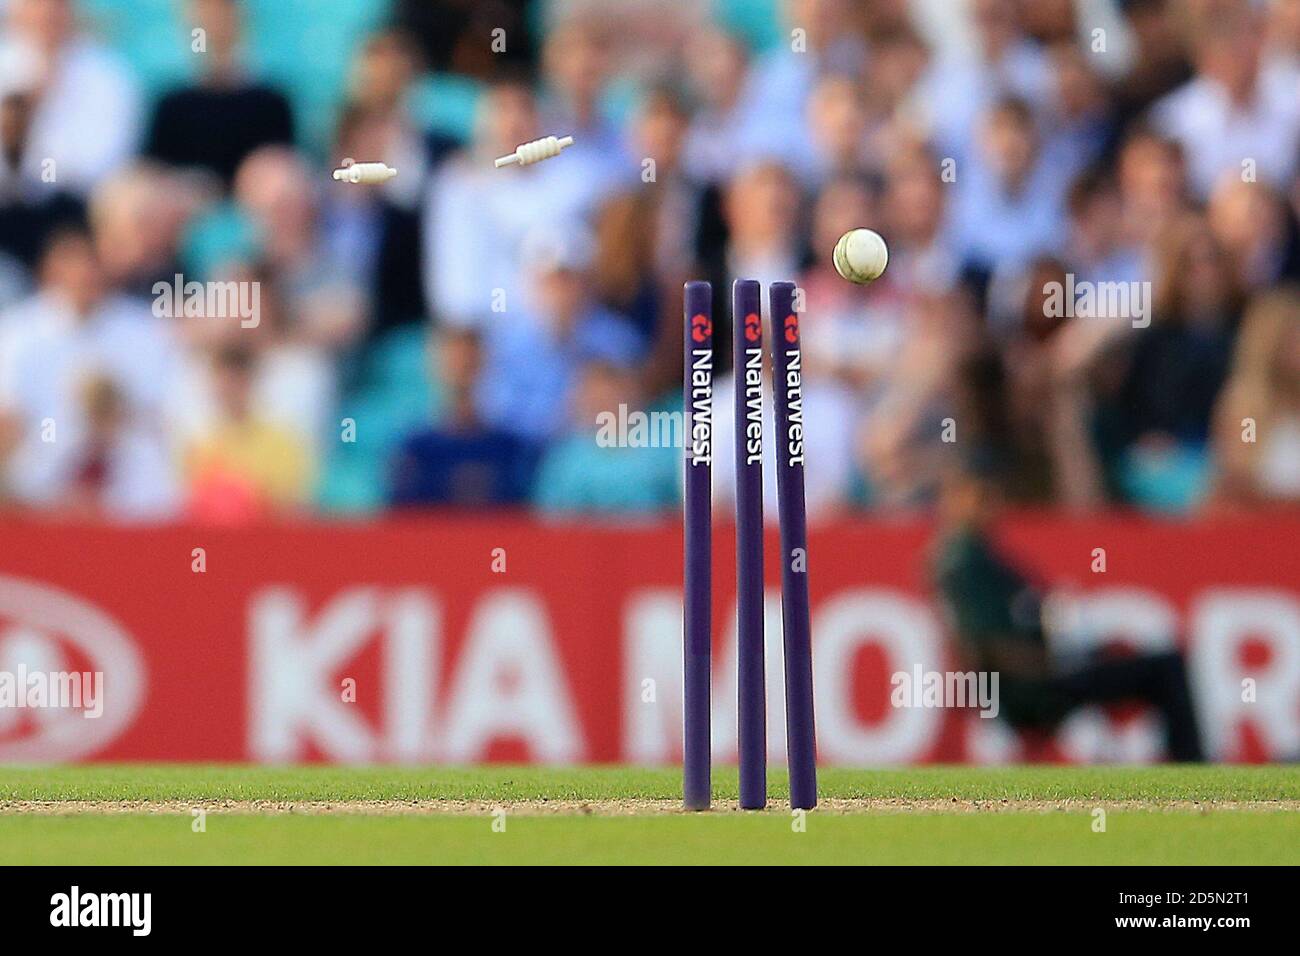 A view of Bales being knocked off a set if Natwest branded cricket stumps  Stock Photo